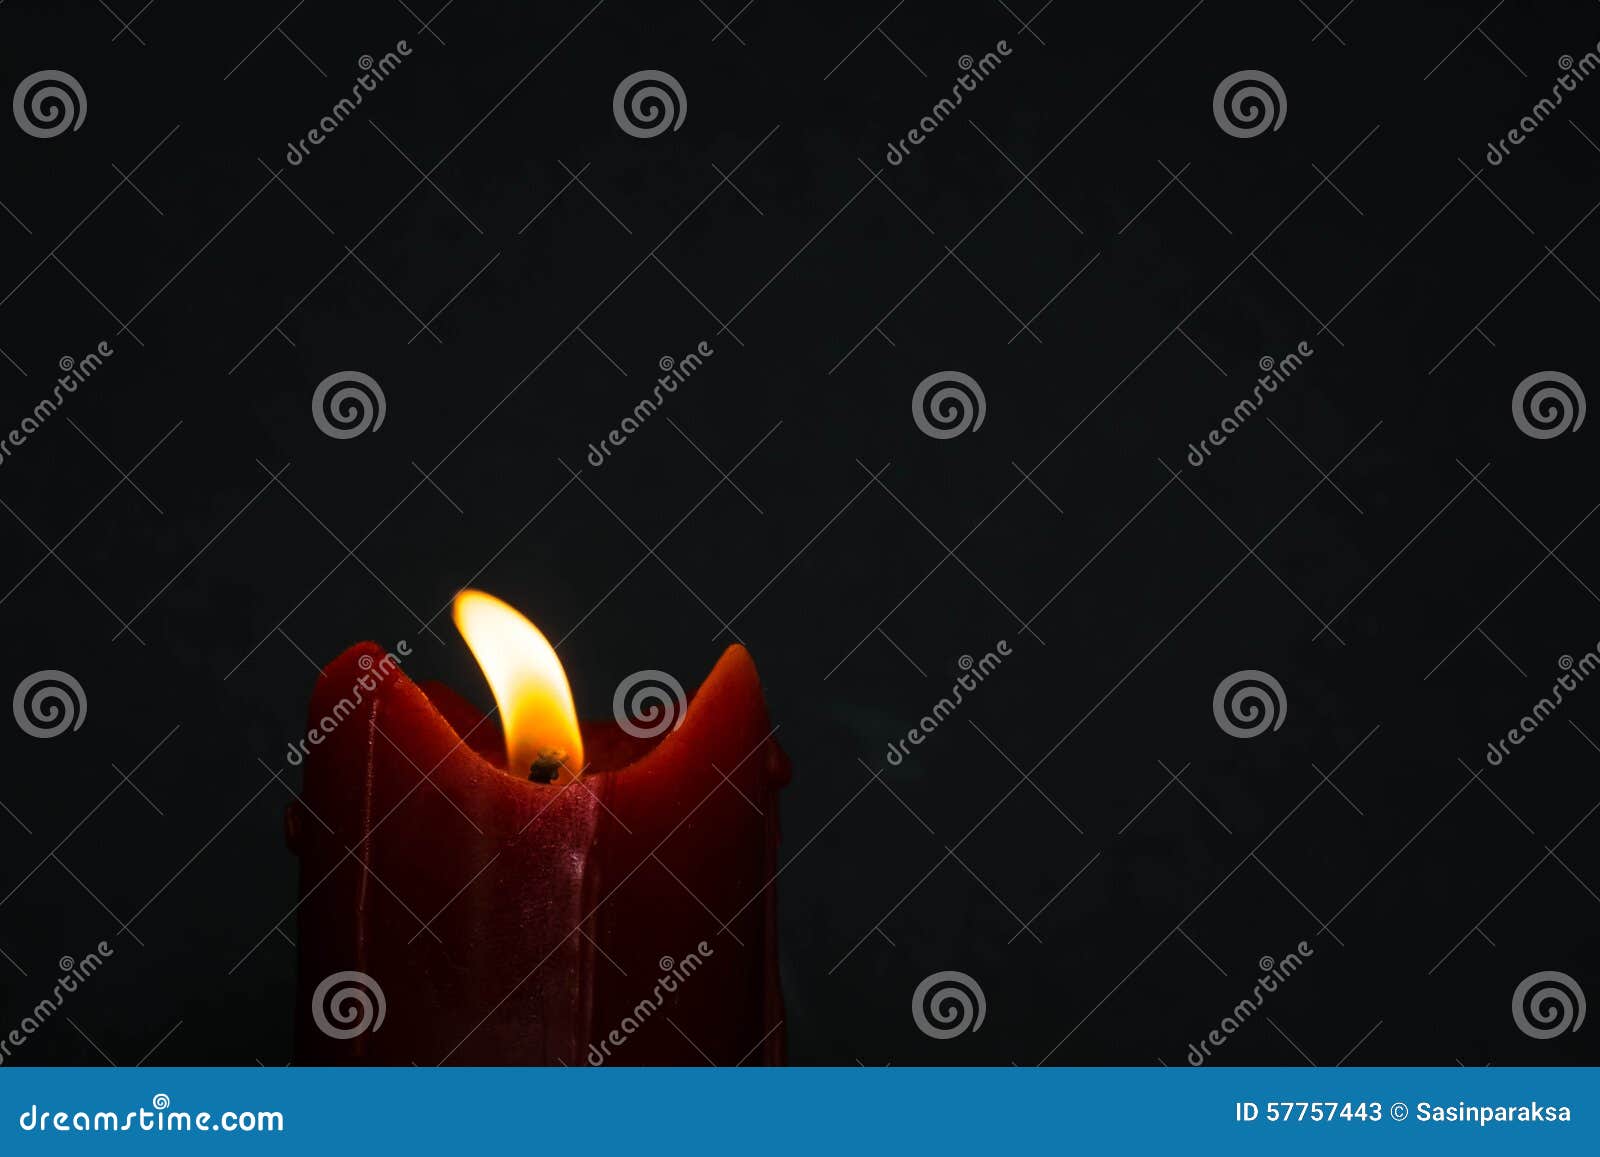 old red candle with glimmer light flame on nice grey background, with blank upper space